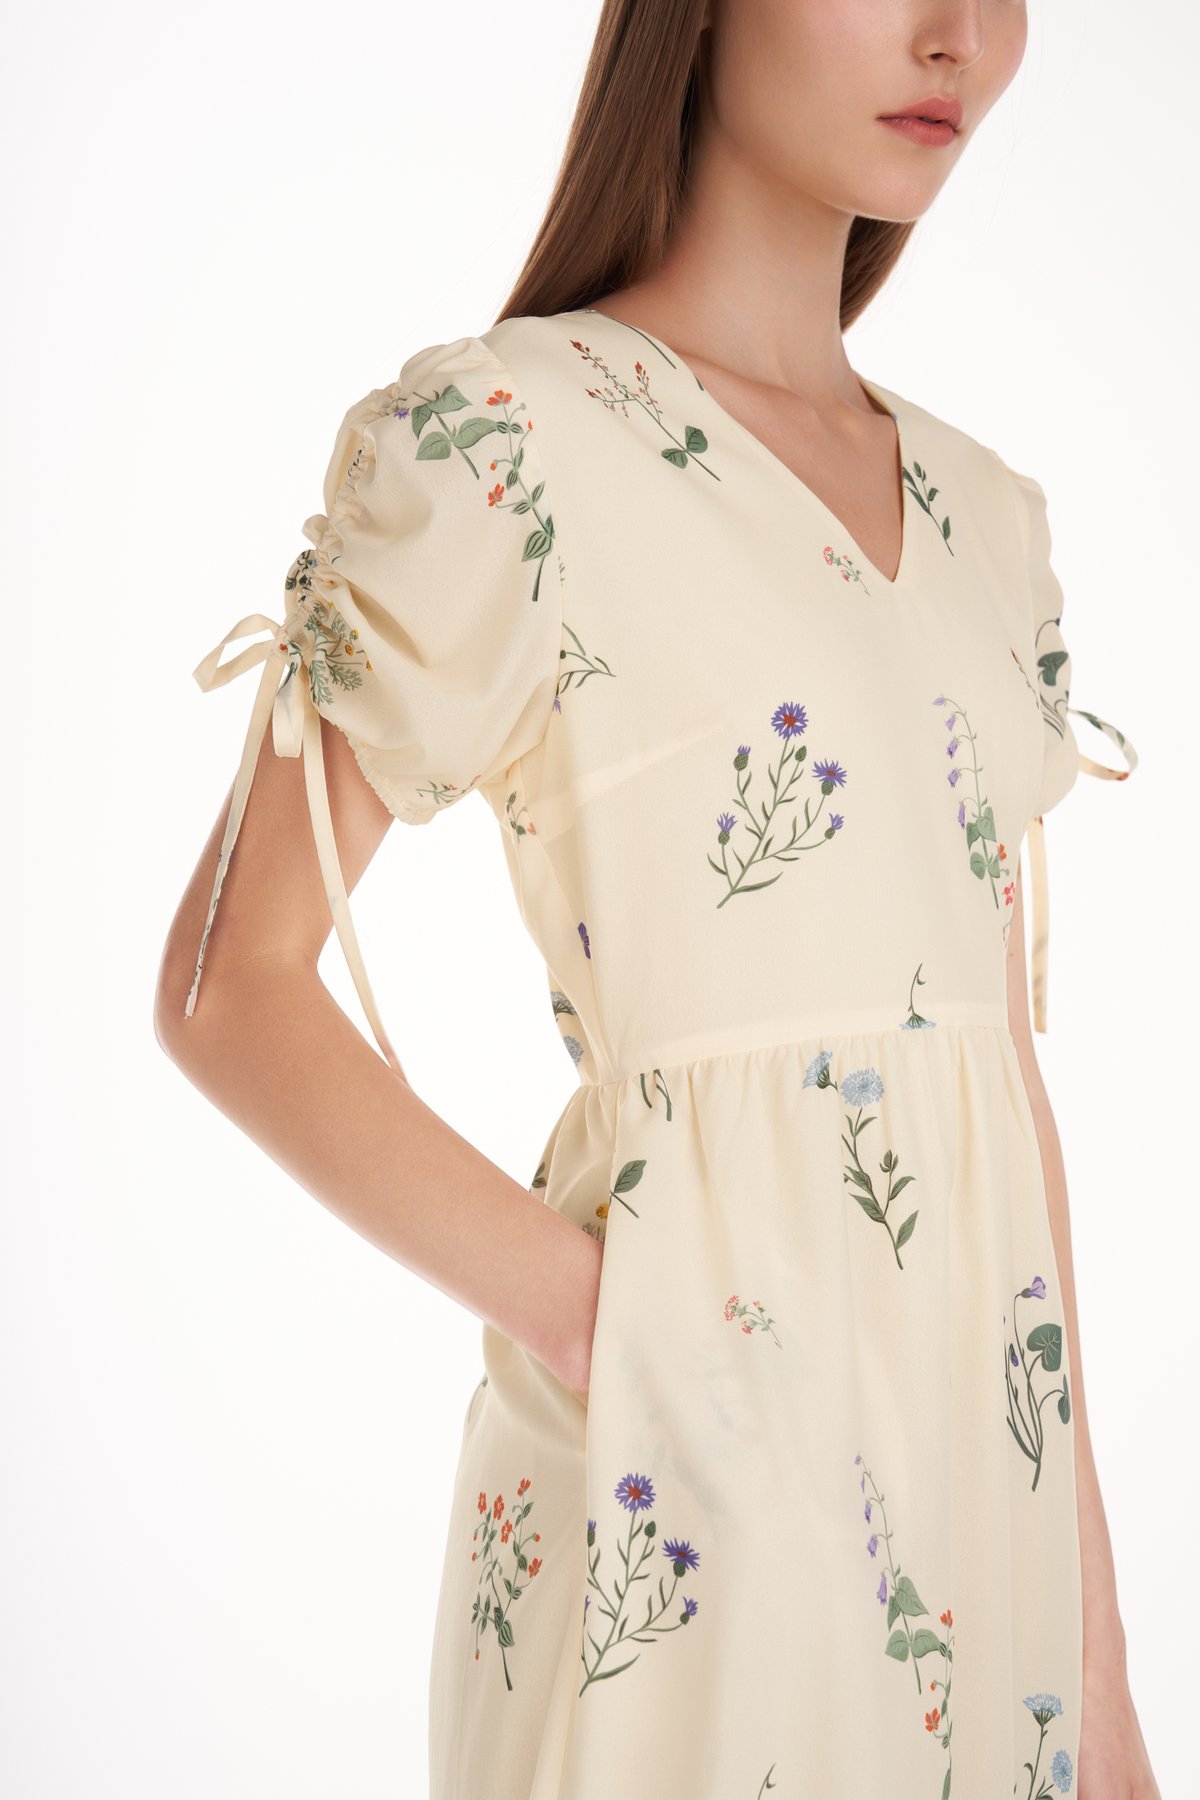 Elina Floral Ruched Dress in Cream